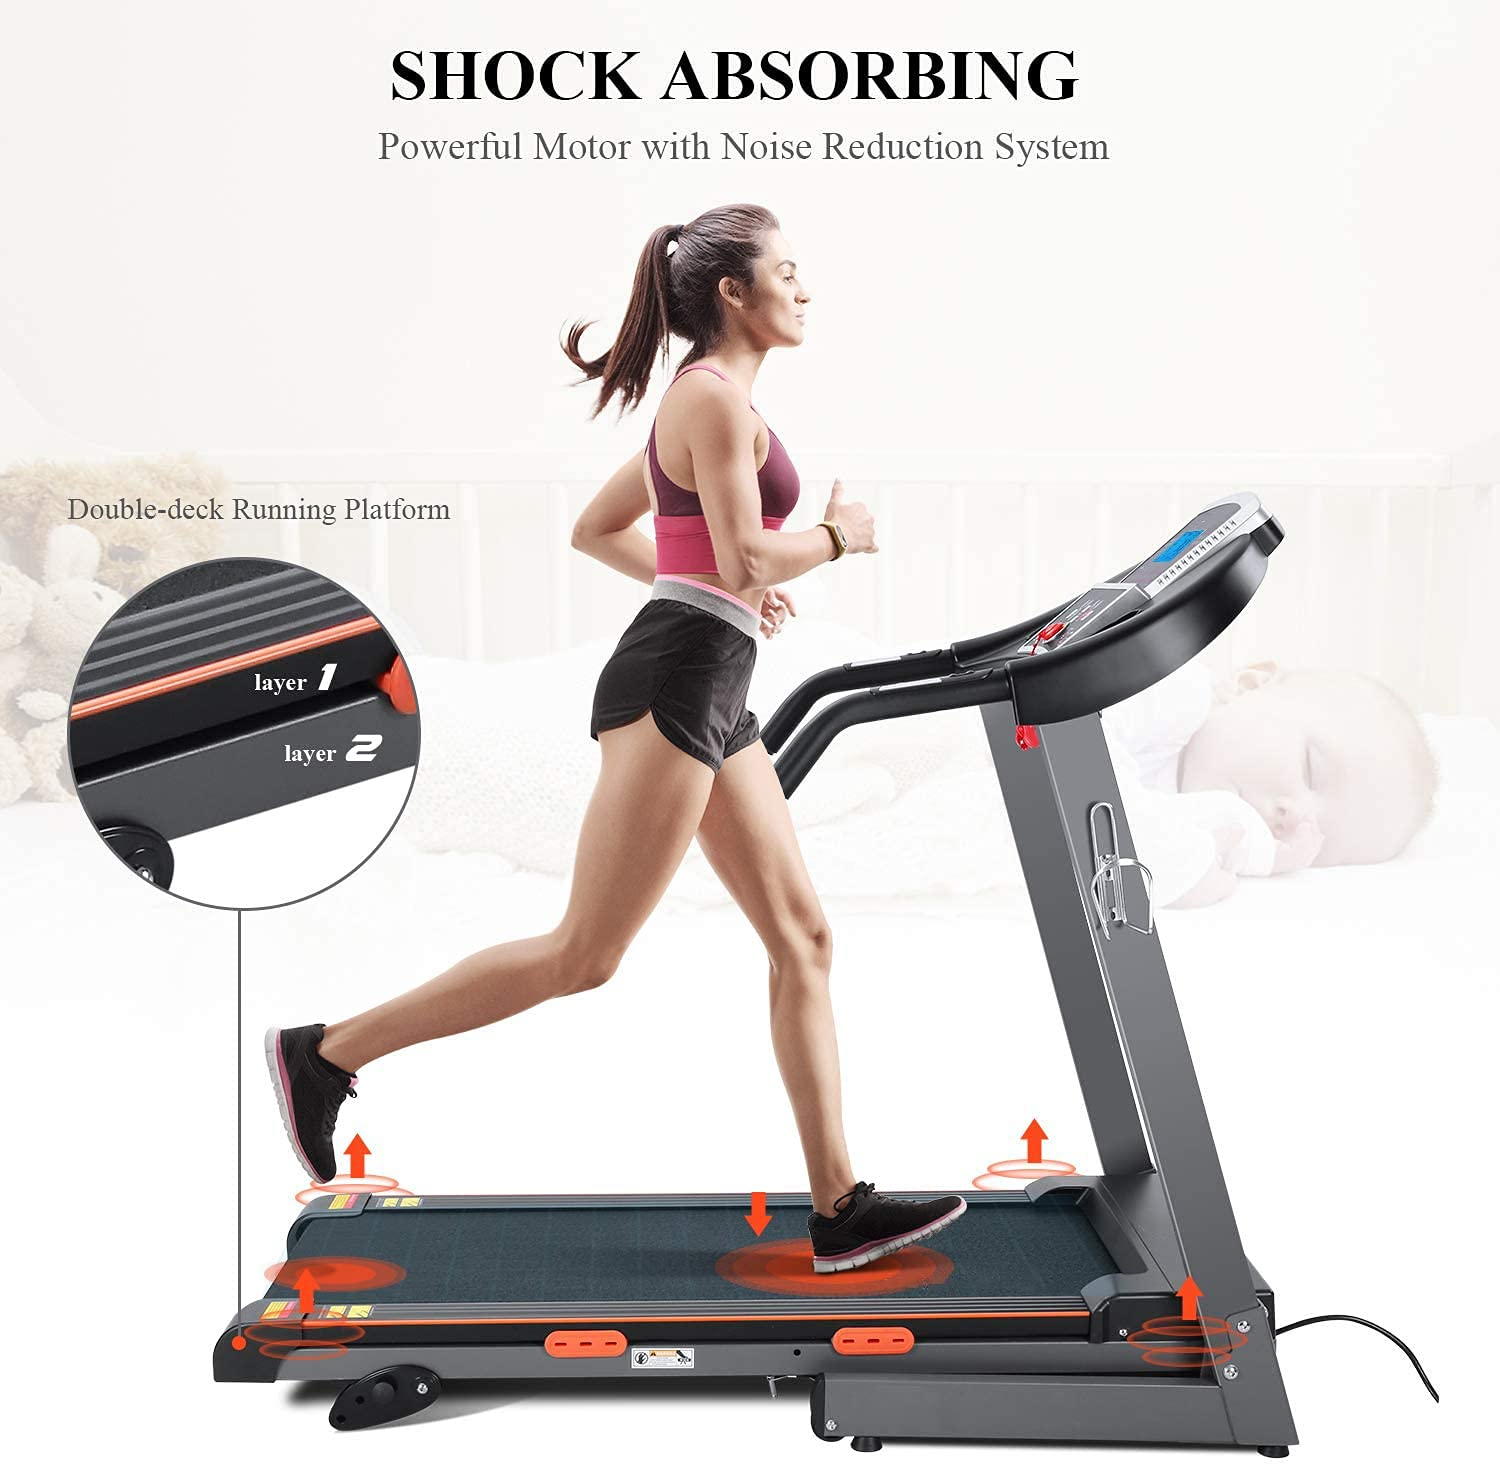 Load image into Gallery viewer, MARNUR Folding Treadmill 17 IN Electric Exercise Running Machine 3 Levels Manual Incline 2.5 HP Power 15 Preset Program Max Speed 8.5 MPH with Large Display, Cup Holder
